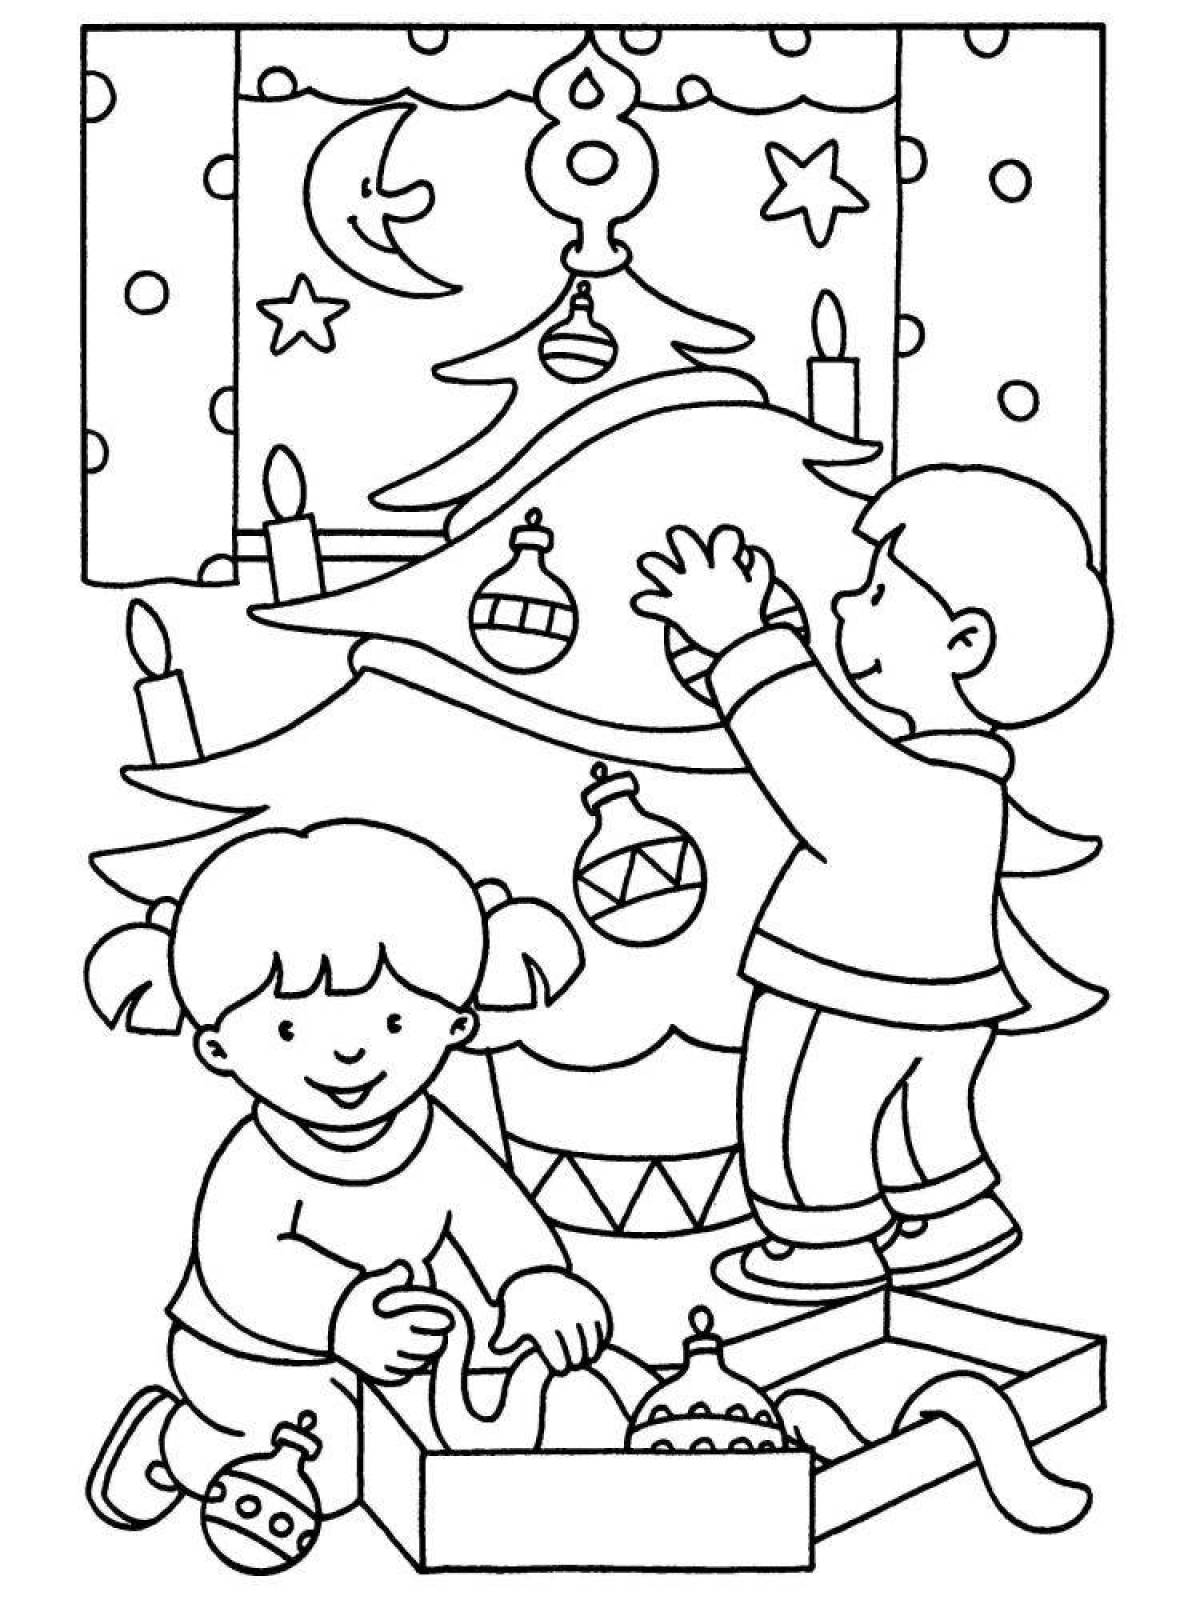 Exciting safe Christmas coloring book